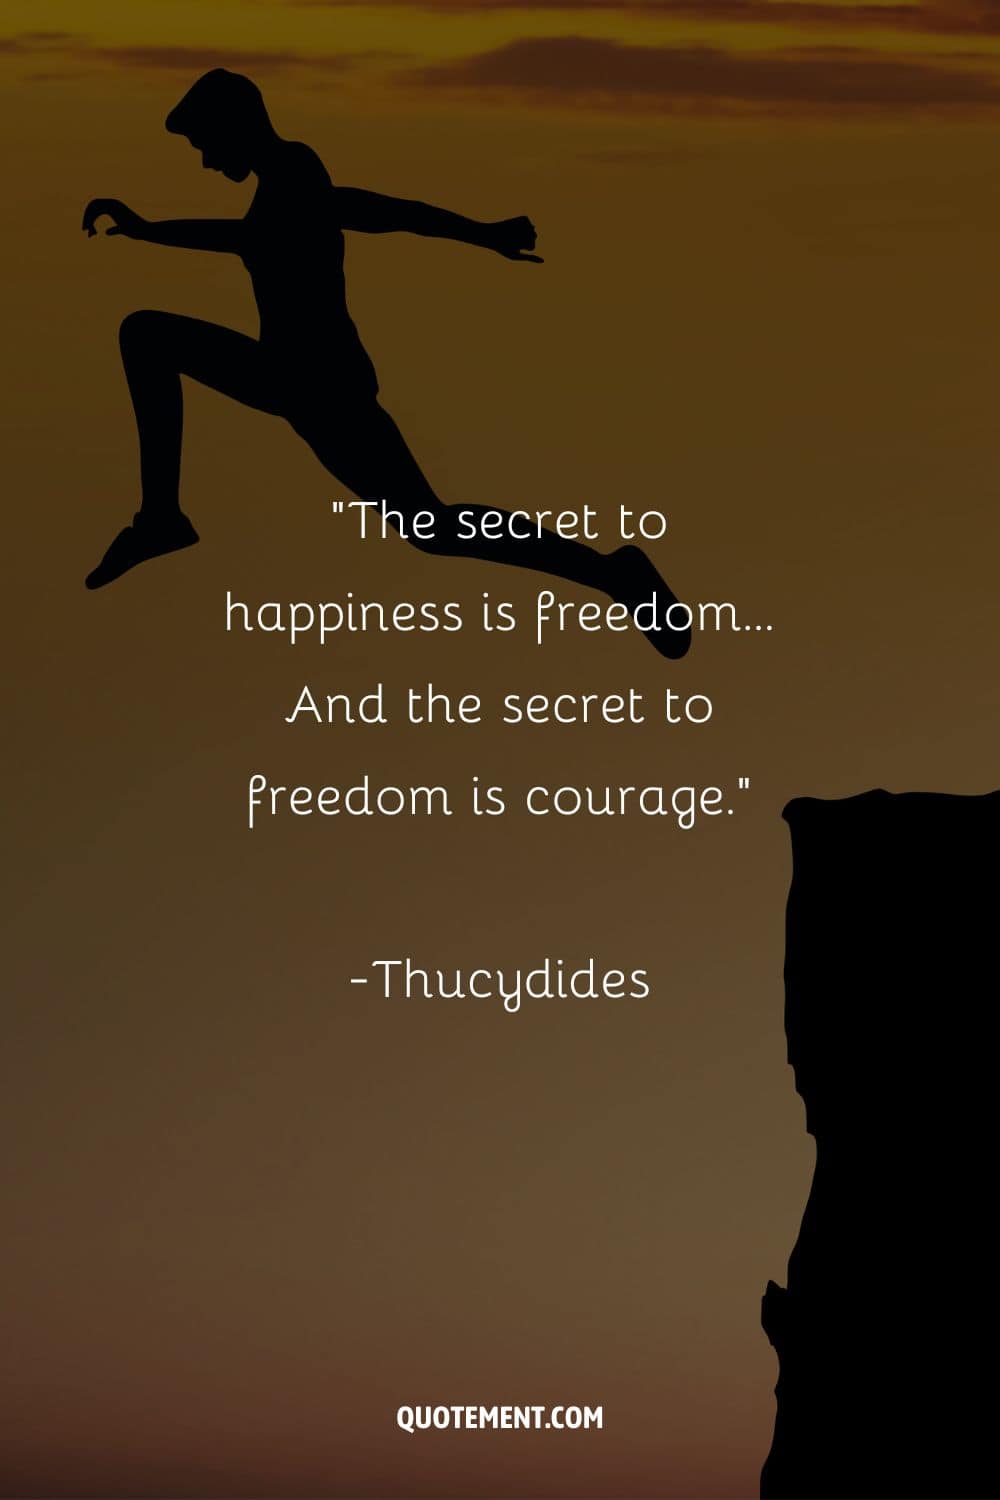 silhouette of a man leaping from a cliff representing the best quote about courage
